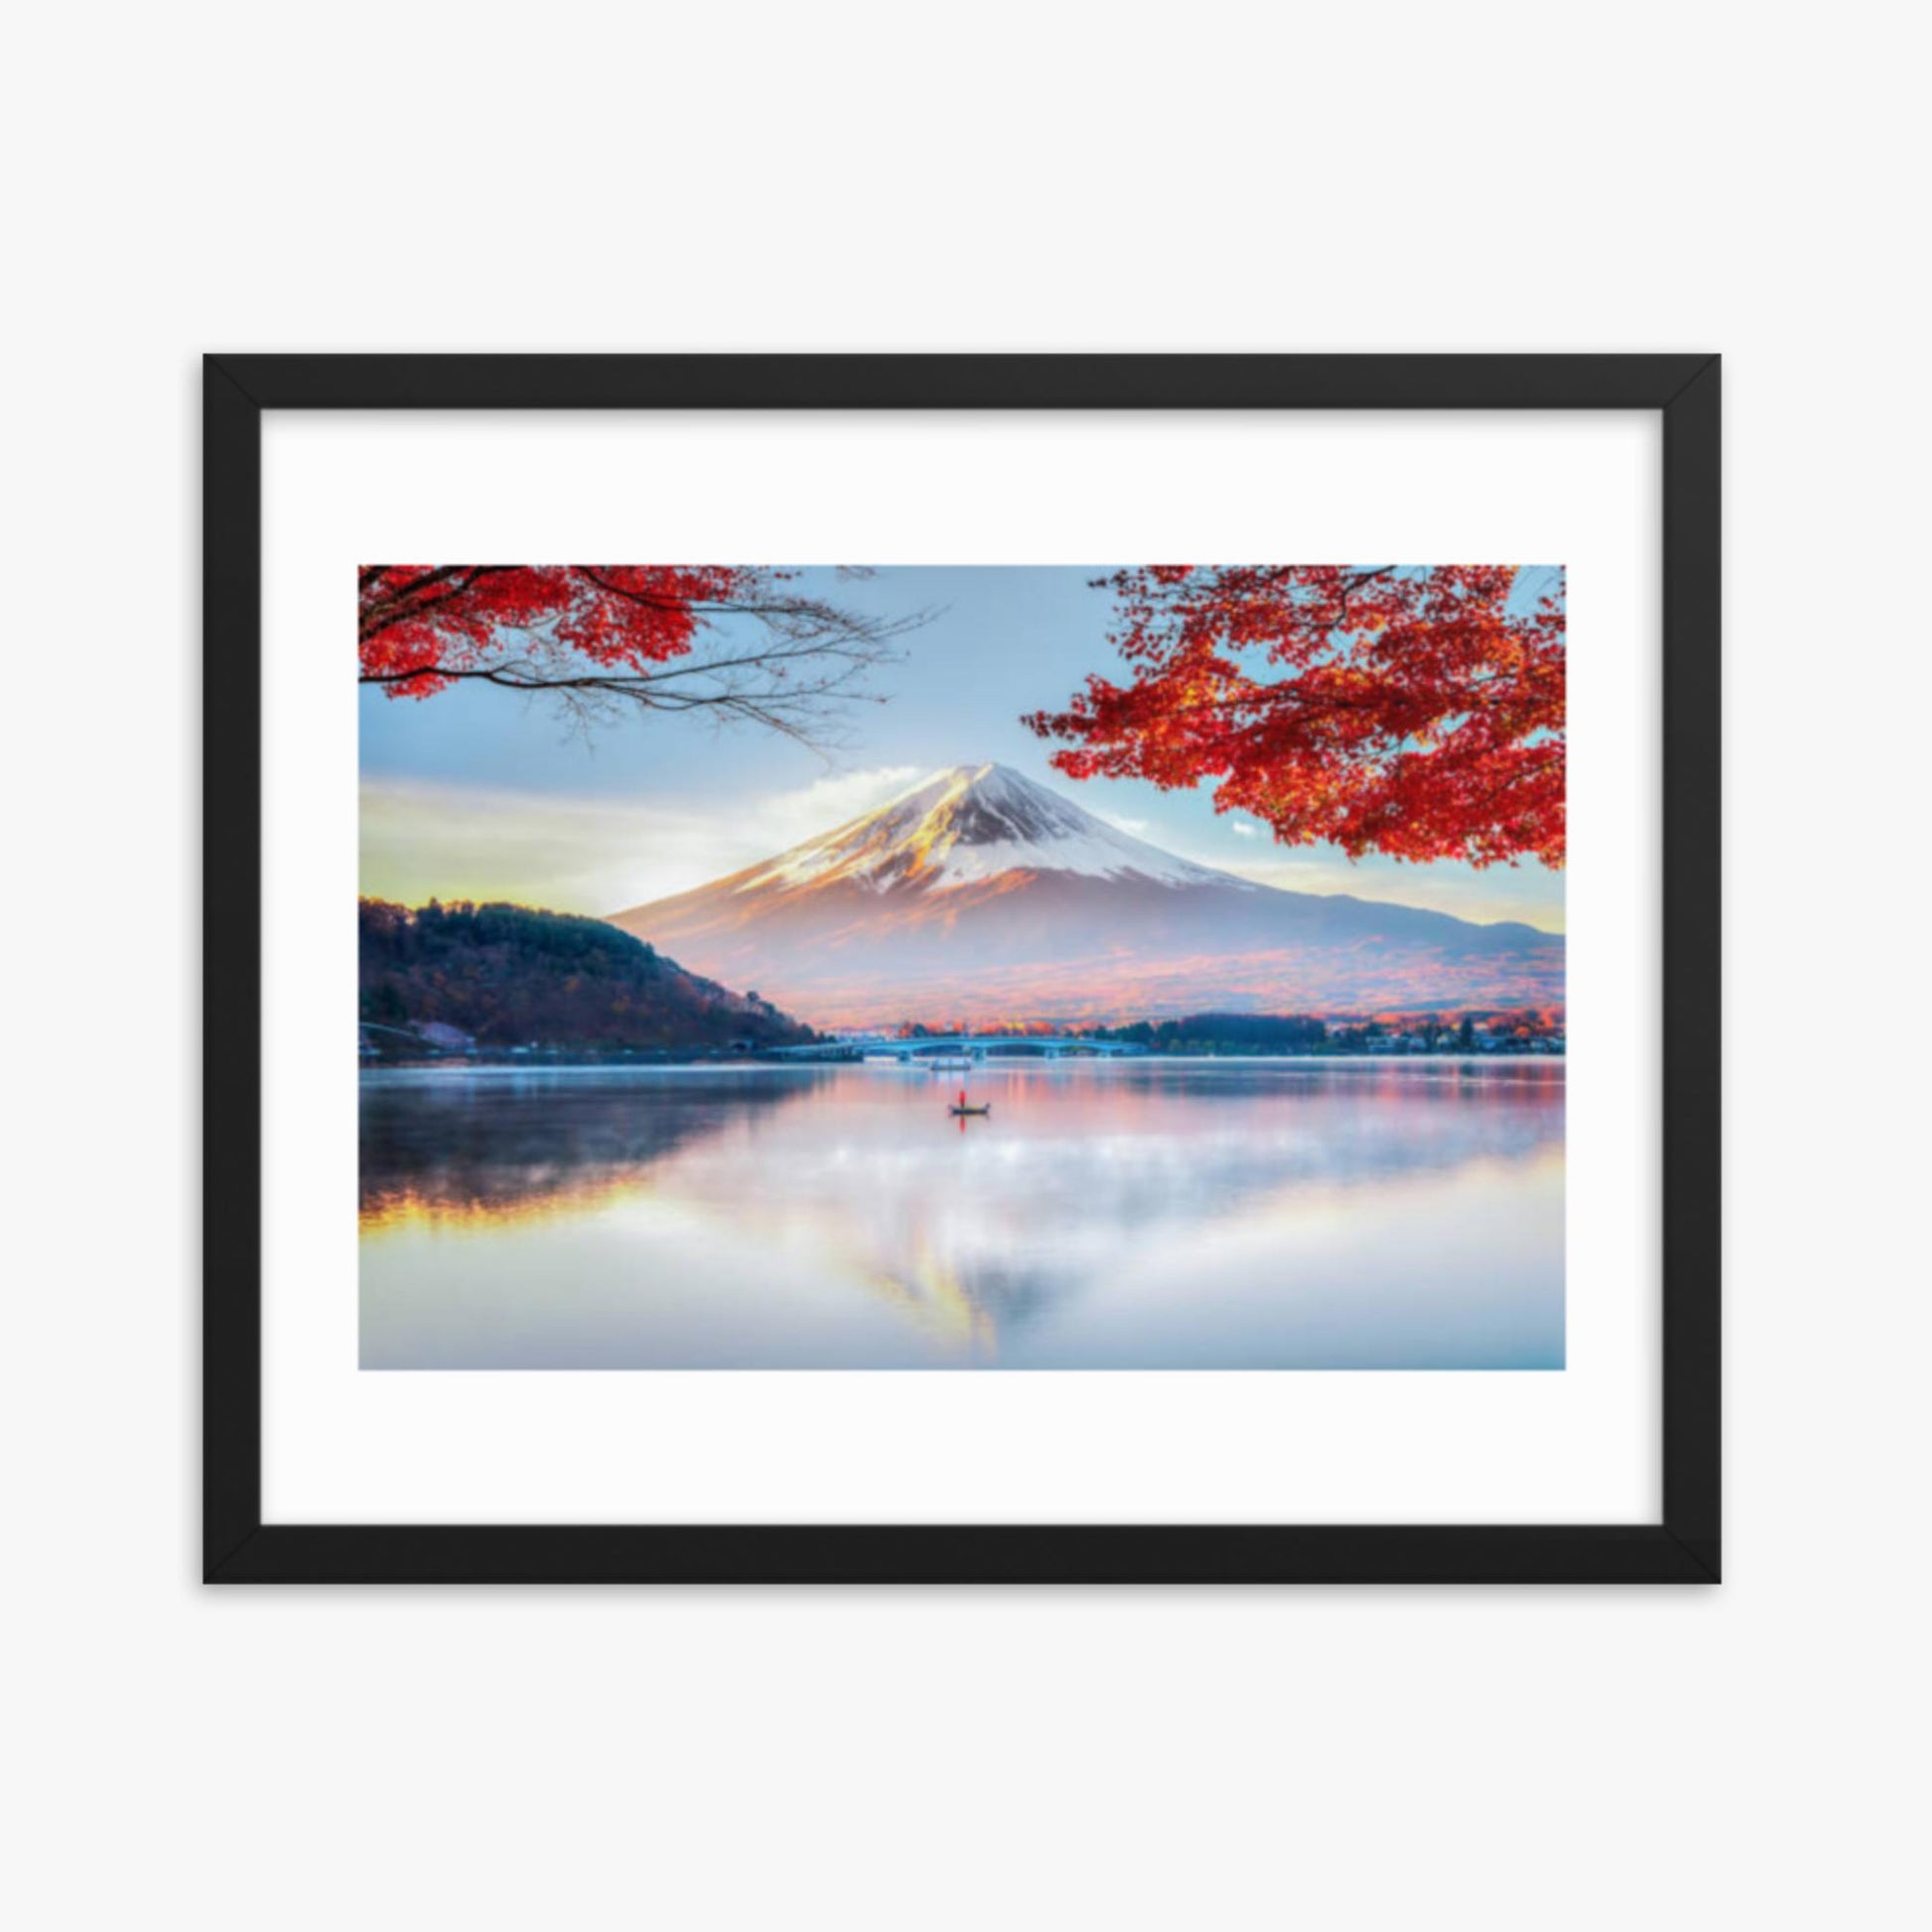 Fuji Mountain , Red Maple Tree and Fisherman Boat with Morning Mist in Autumn, Kawaguchiko Lake, Japan 16x20 in Poster With Black Frame